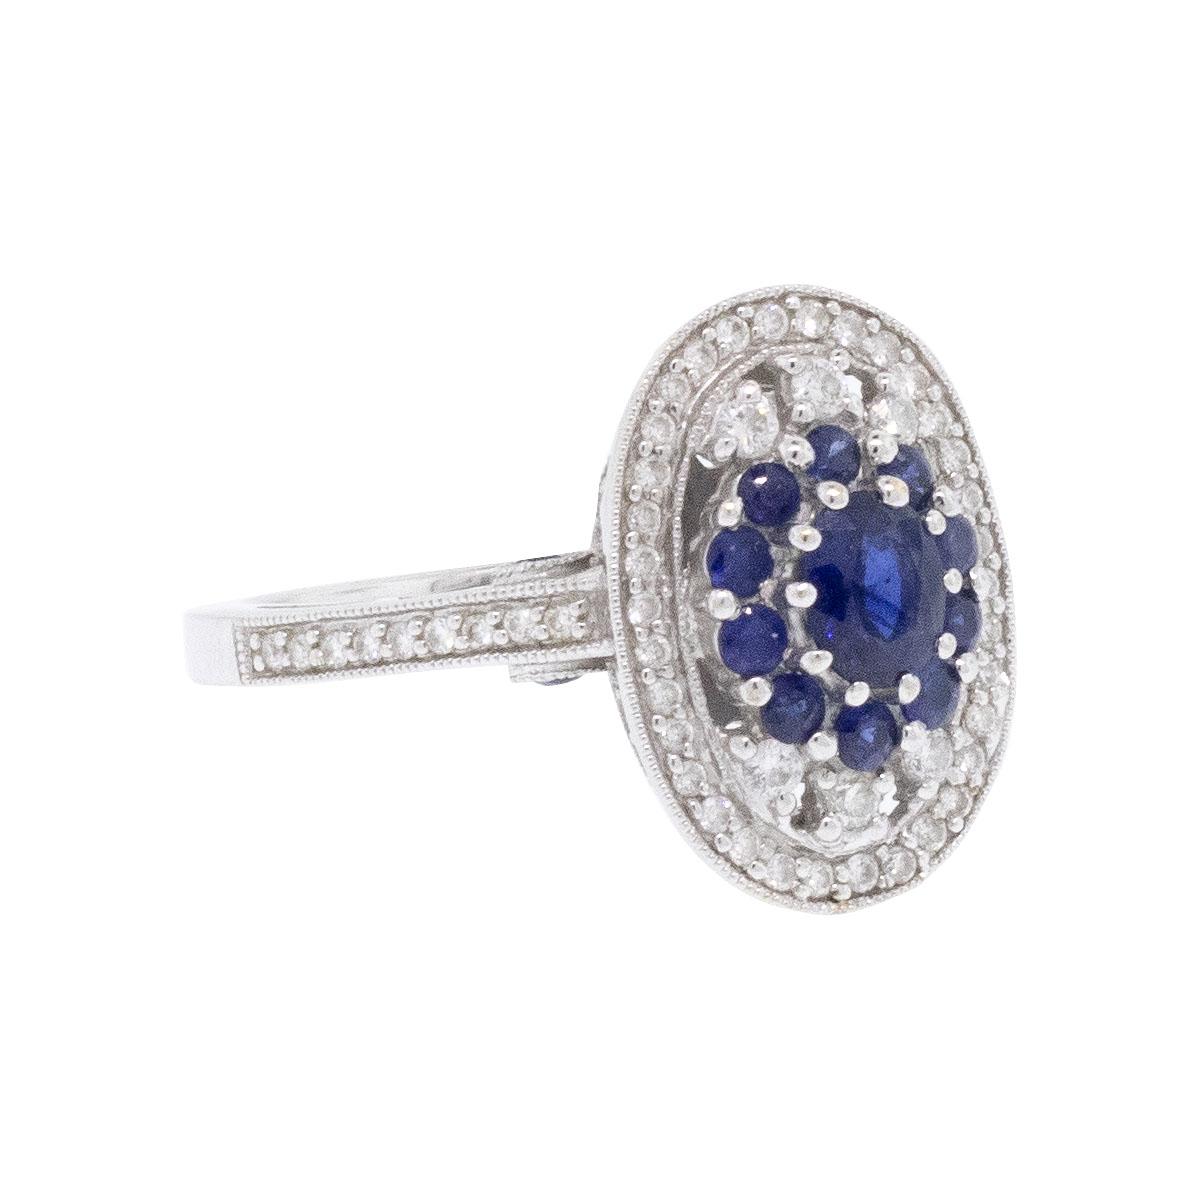 Elevate your style with this exquisite 18k White Gold Sapphire & Diamond Cocktail Ring. Crafted from luxurious 18k white gold, this gemstone cocktail ring features a stunning combination of white diamonds and sapphire gemstones, adding a touch of